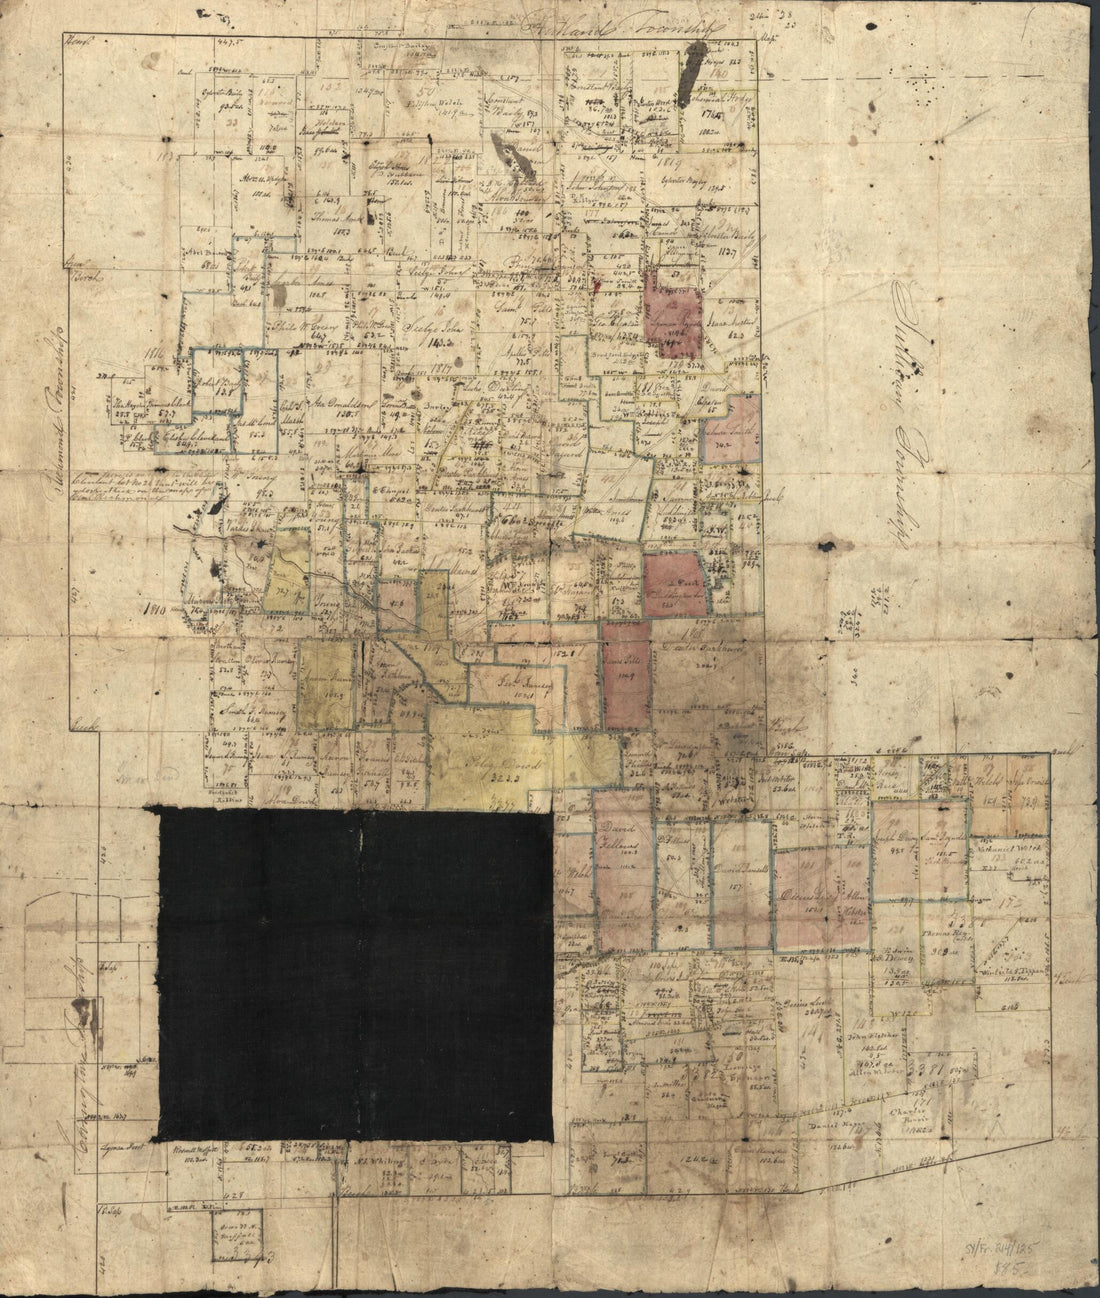 This old map of Sullivan Township from 1834 was created by William Bingham in 1834